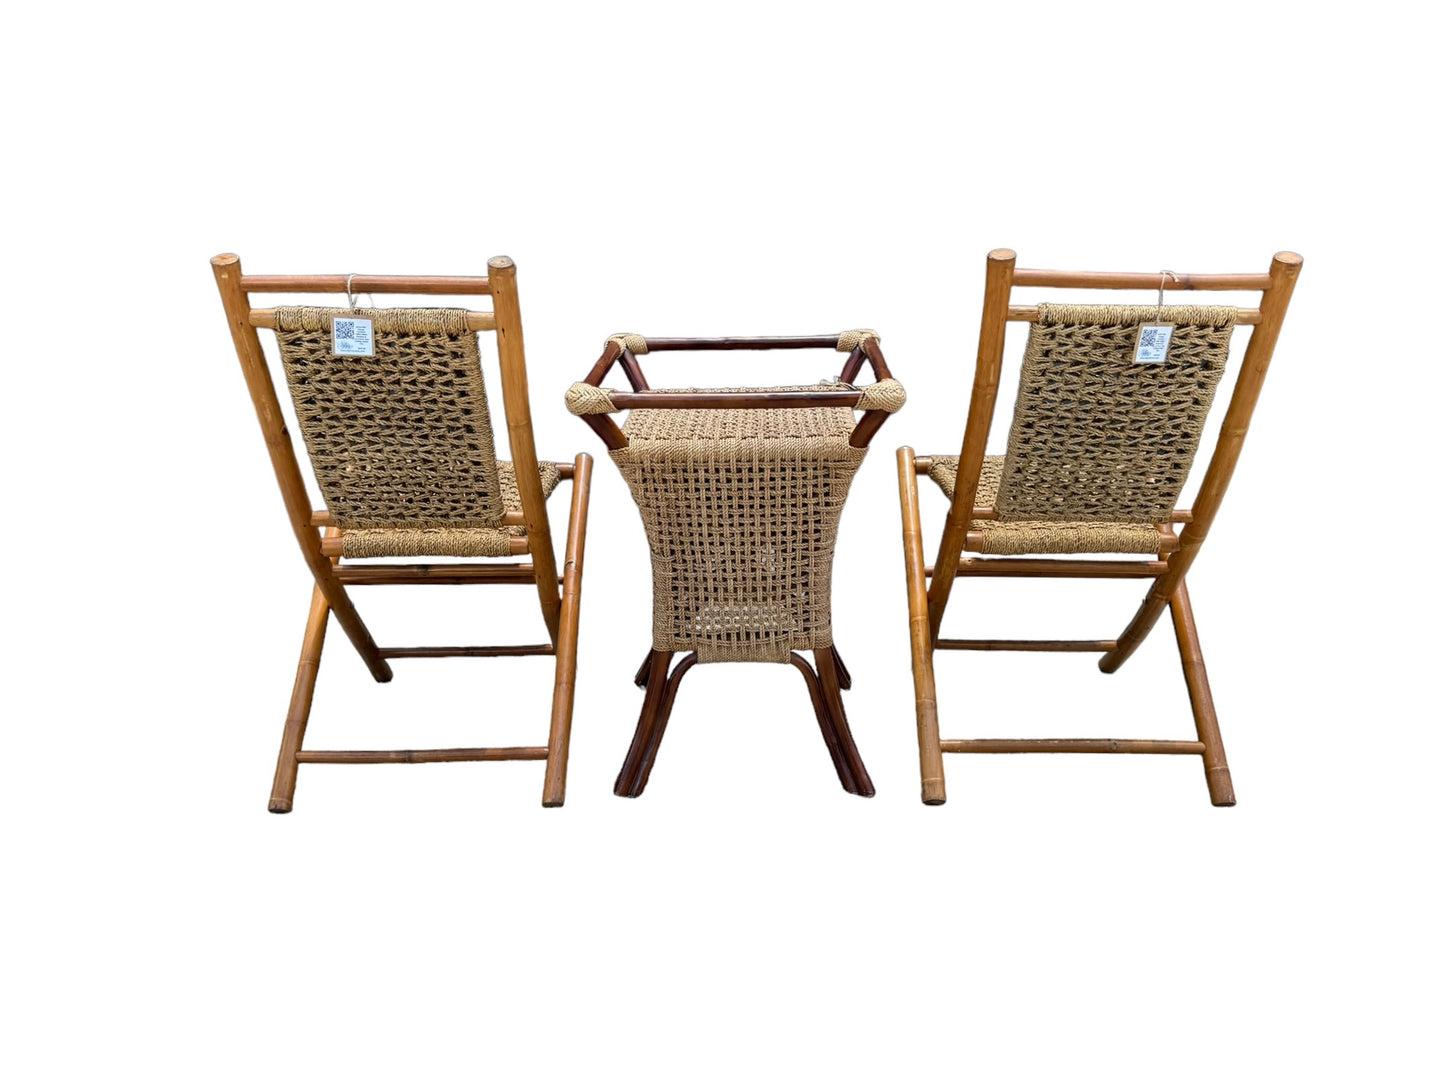 Vintage Bamboo Wood and Cord Woven Rope Seat Folding Chairs and Matching Table. 1960s